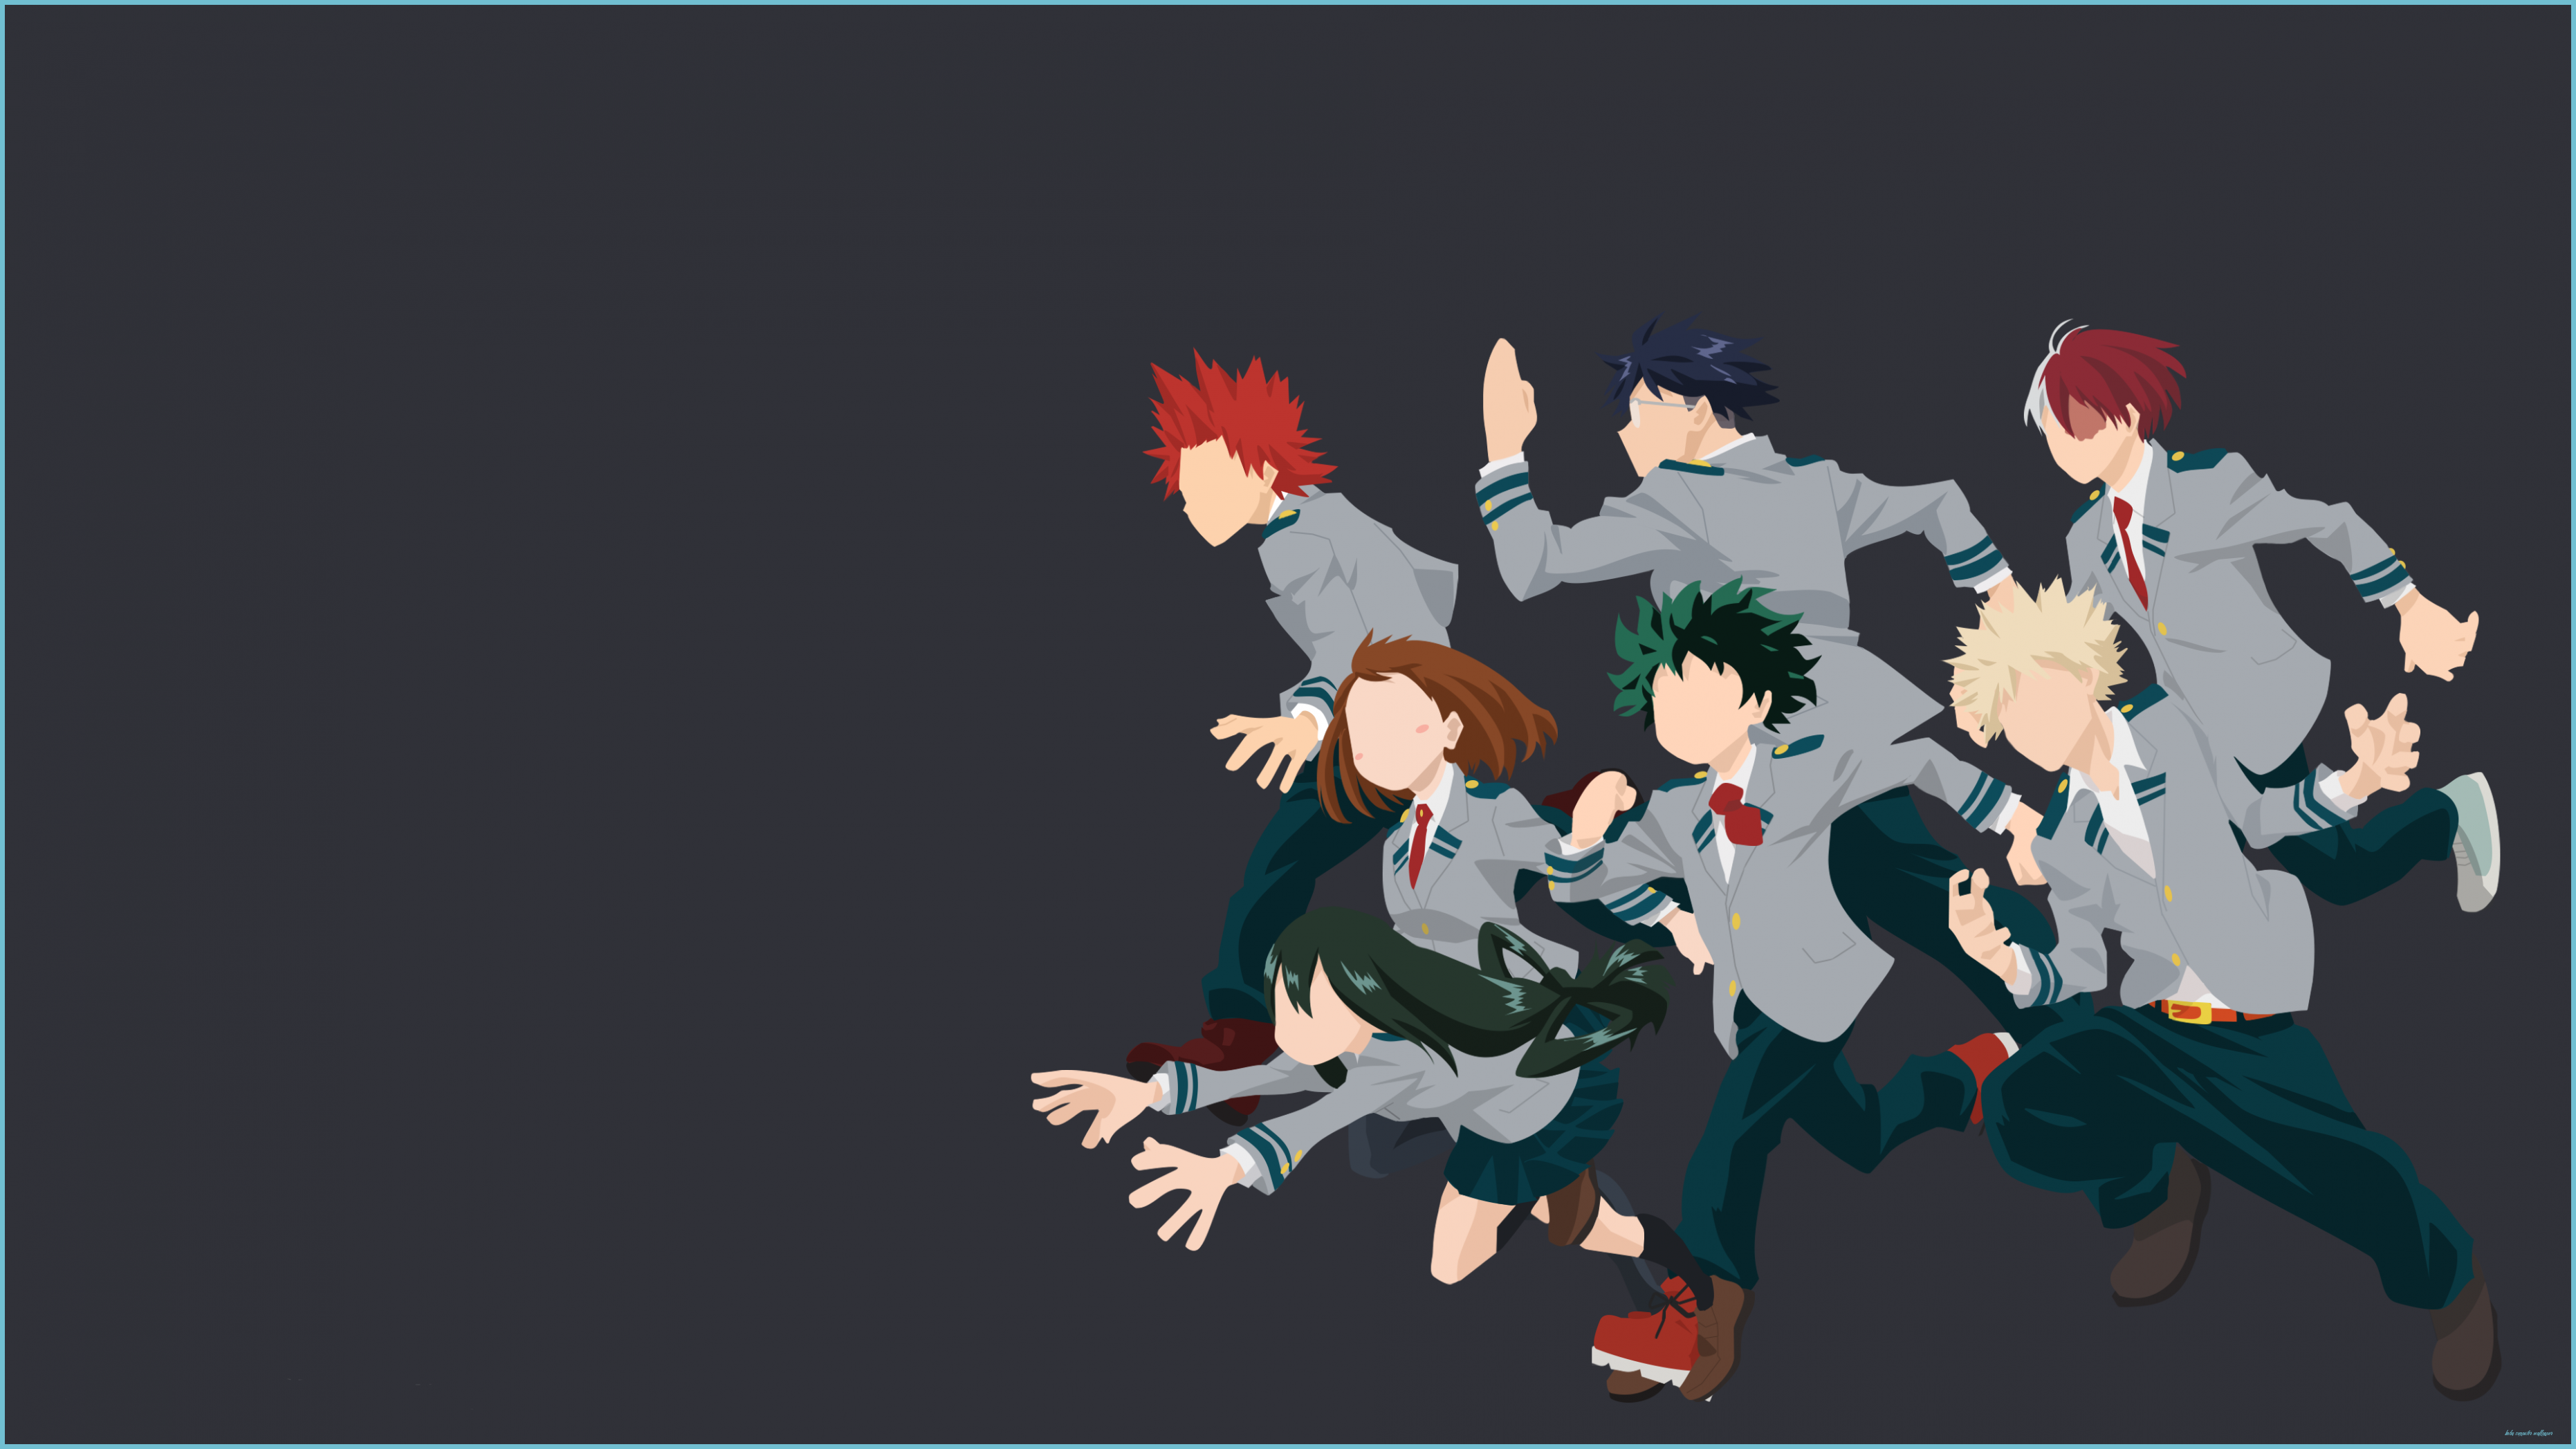 I Will Tell You The Truth About Bnha Computer Wallpaper In The Next 10 Seconds. Bnha Computer Wallpaper